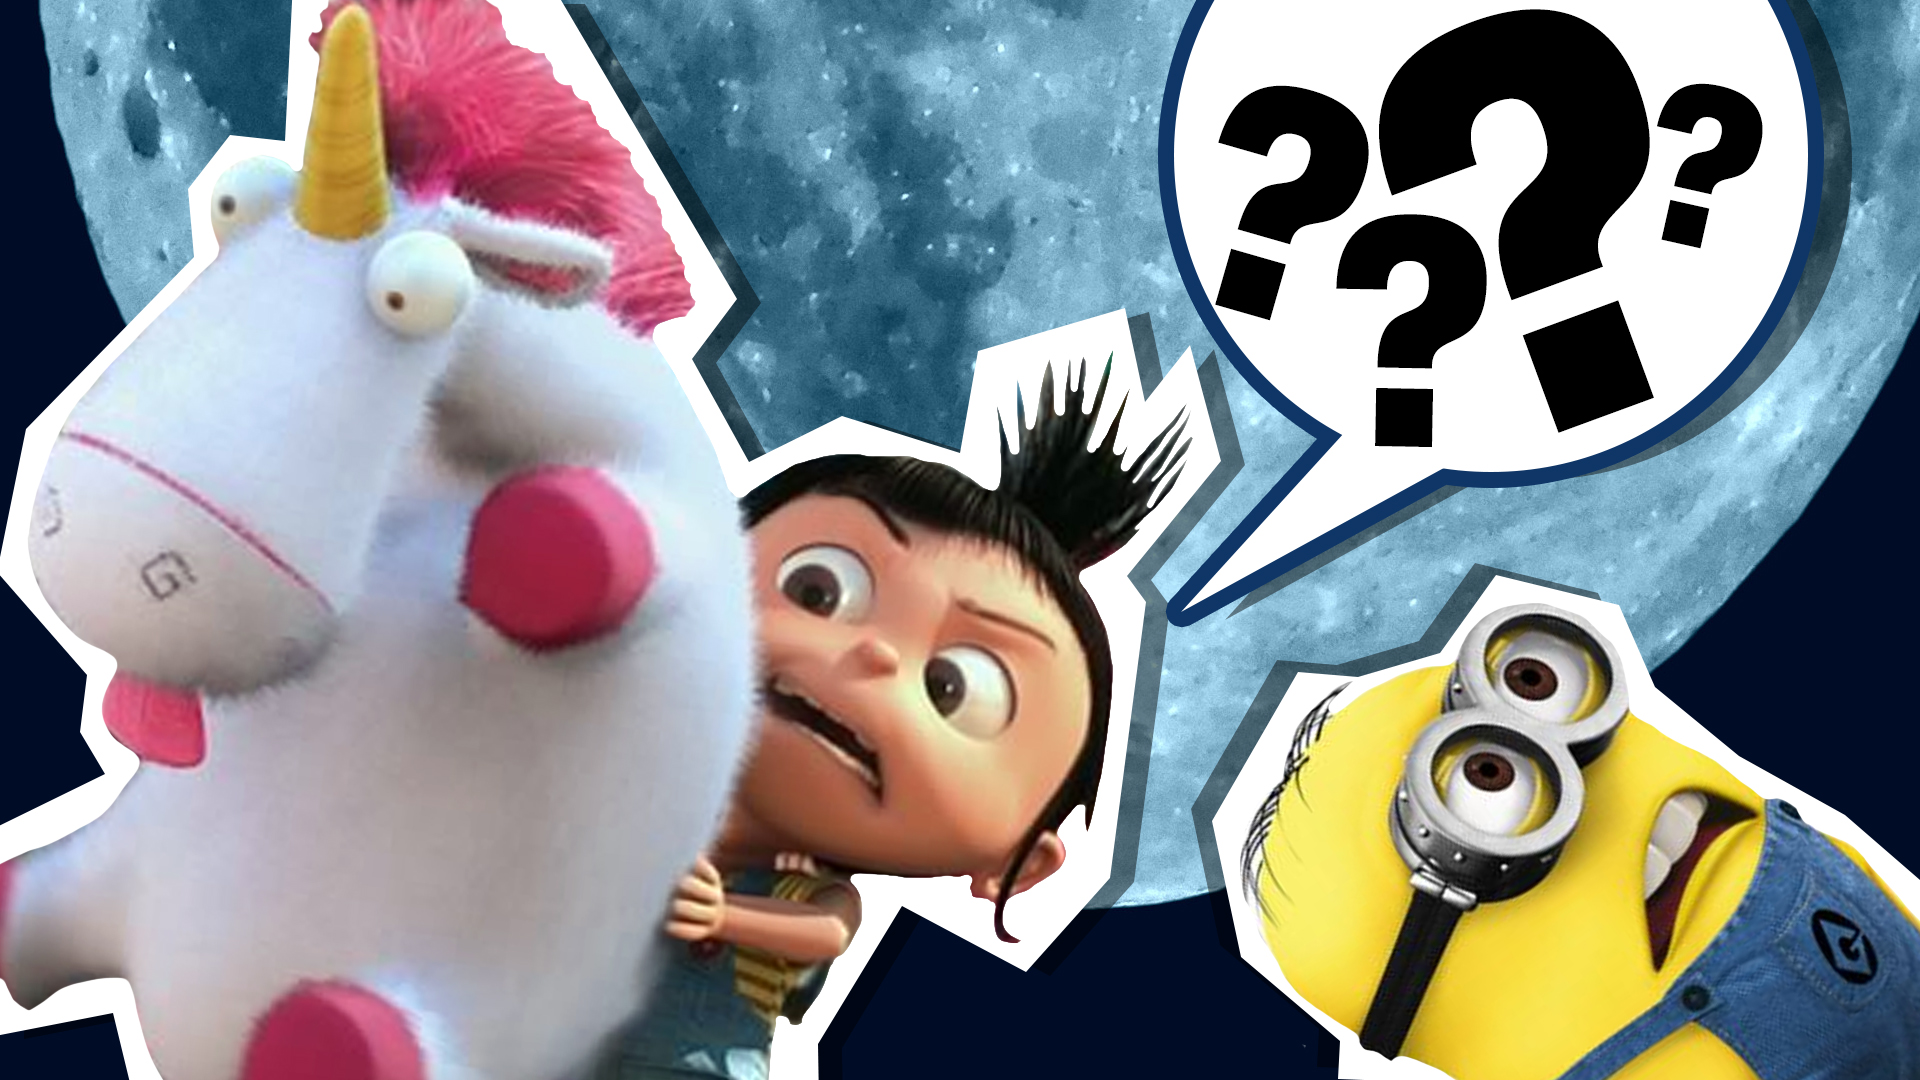 Despicable me with question marks in a speech bubble